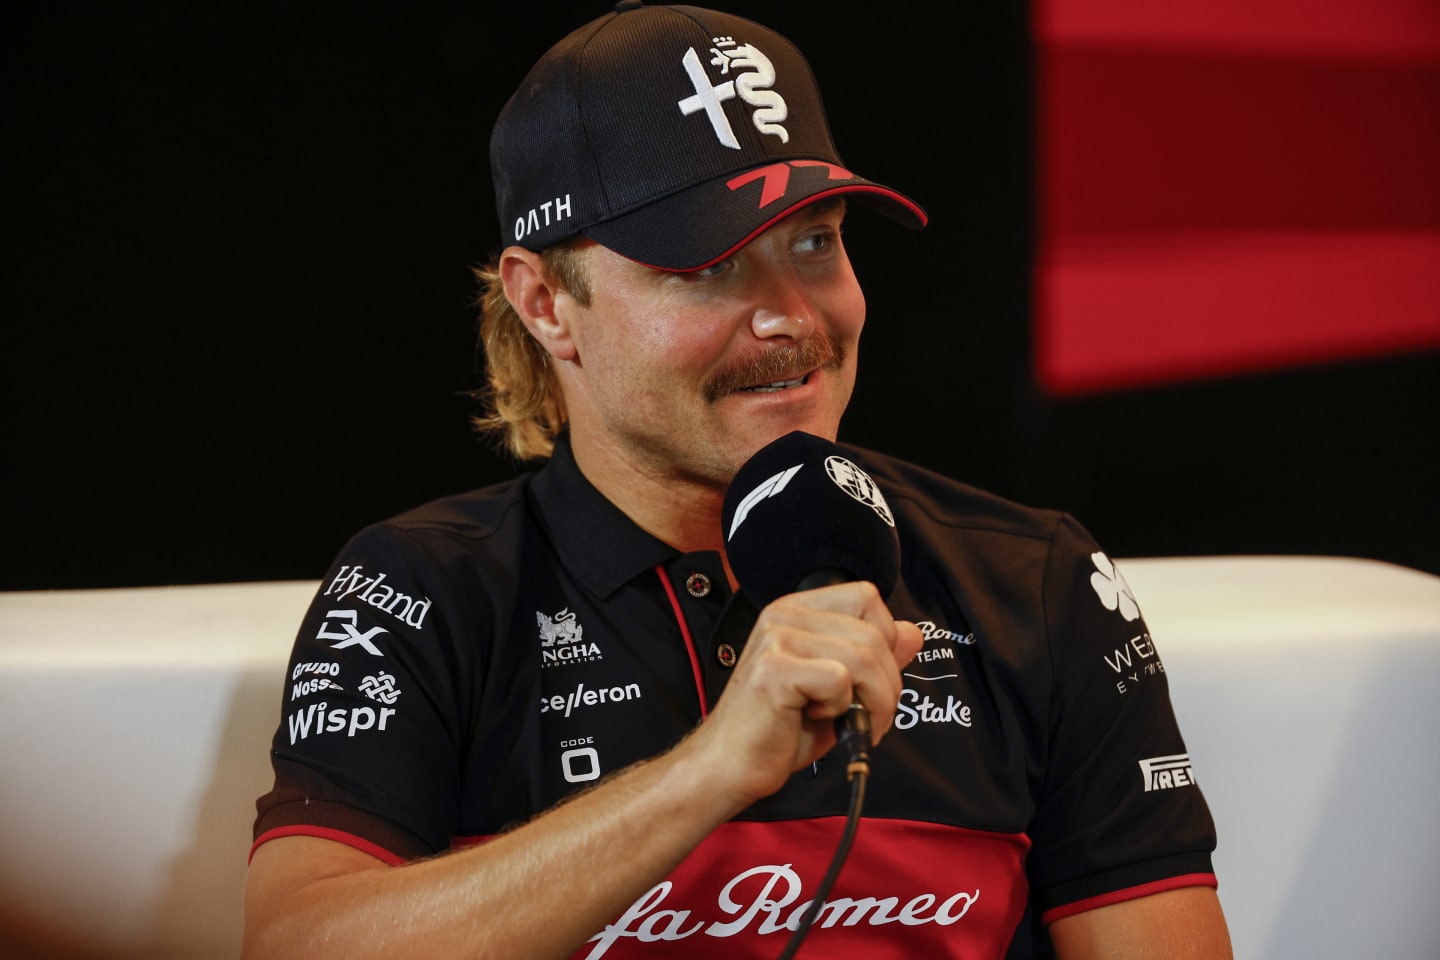 MONTREAL, QUEBEC - JUNE 15: Valtteri Bottas of Finland and Alfa Romeo F1 attends the Drivers Press Conference during previews ahead of the F1 Grand Prix of Canada at Circuit Gilles Villeneuve on June 15, 2023 in Montreal, Quebec. (Photo by Jared C. Tilton/Getty Images)